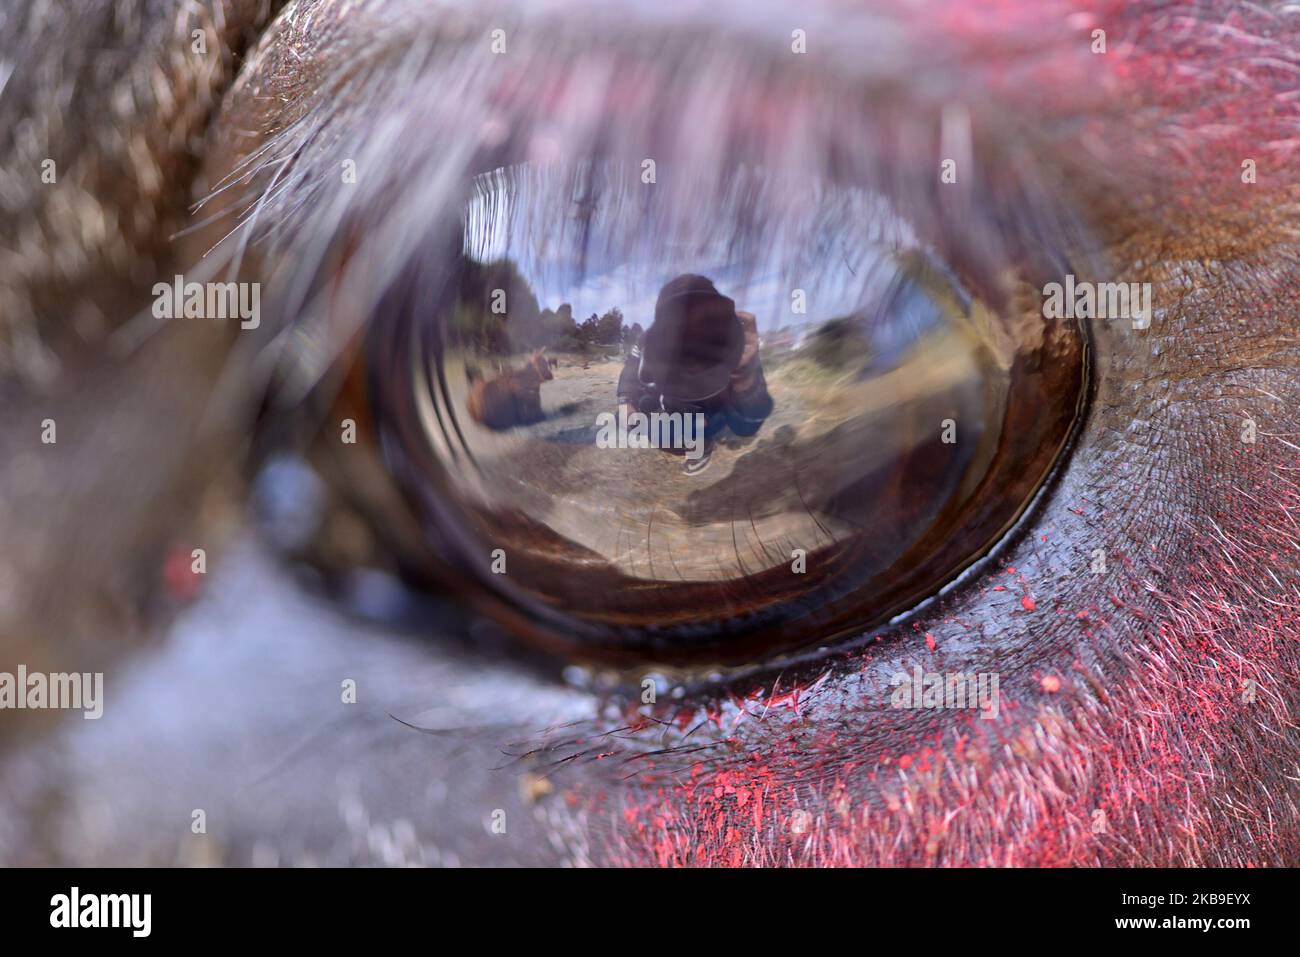 A close up view of eye with colors of a cow during Tihar or Deepawali and Diwali celebrations at Kathmandu, Nepal on Monday, October 28, 2019. Tihar is a hindu festival celebrated in Nepal for 5 days. Cows are considered to be the incarnation of the Hindu god of wealth, Lord Laxmi. Nepalese devotees decorate the cows with marigold flower garlands and colored powders and offer the cows fresh fruits and vegetables. (Photo by Narayan Maharjan/NurPhoto) Stock Photo